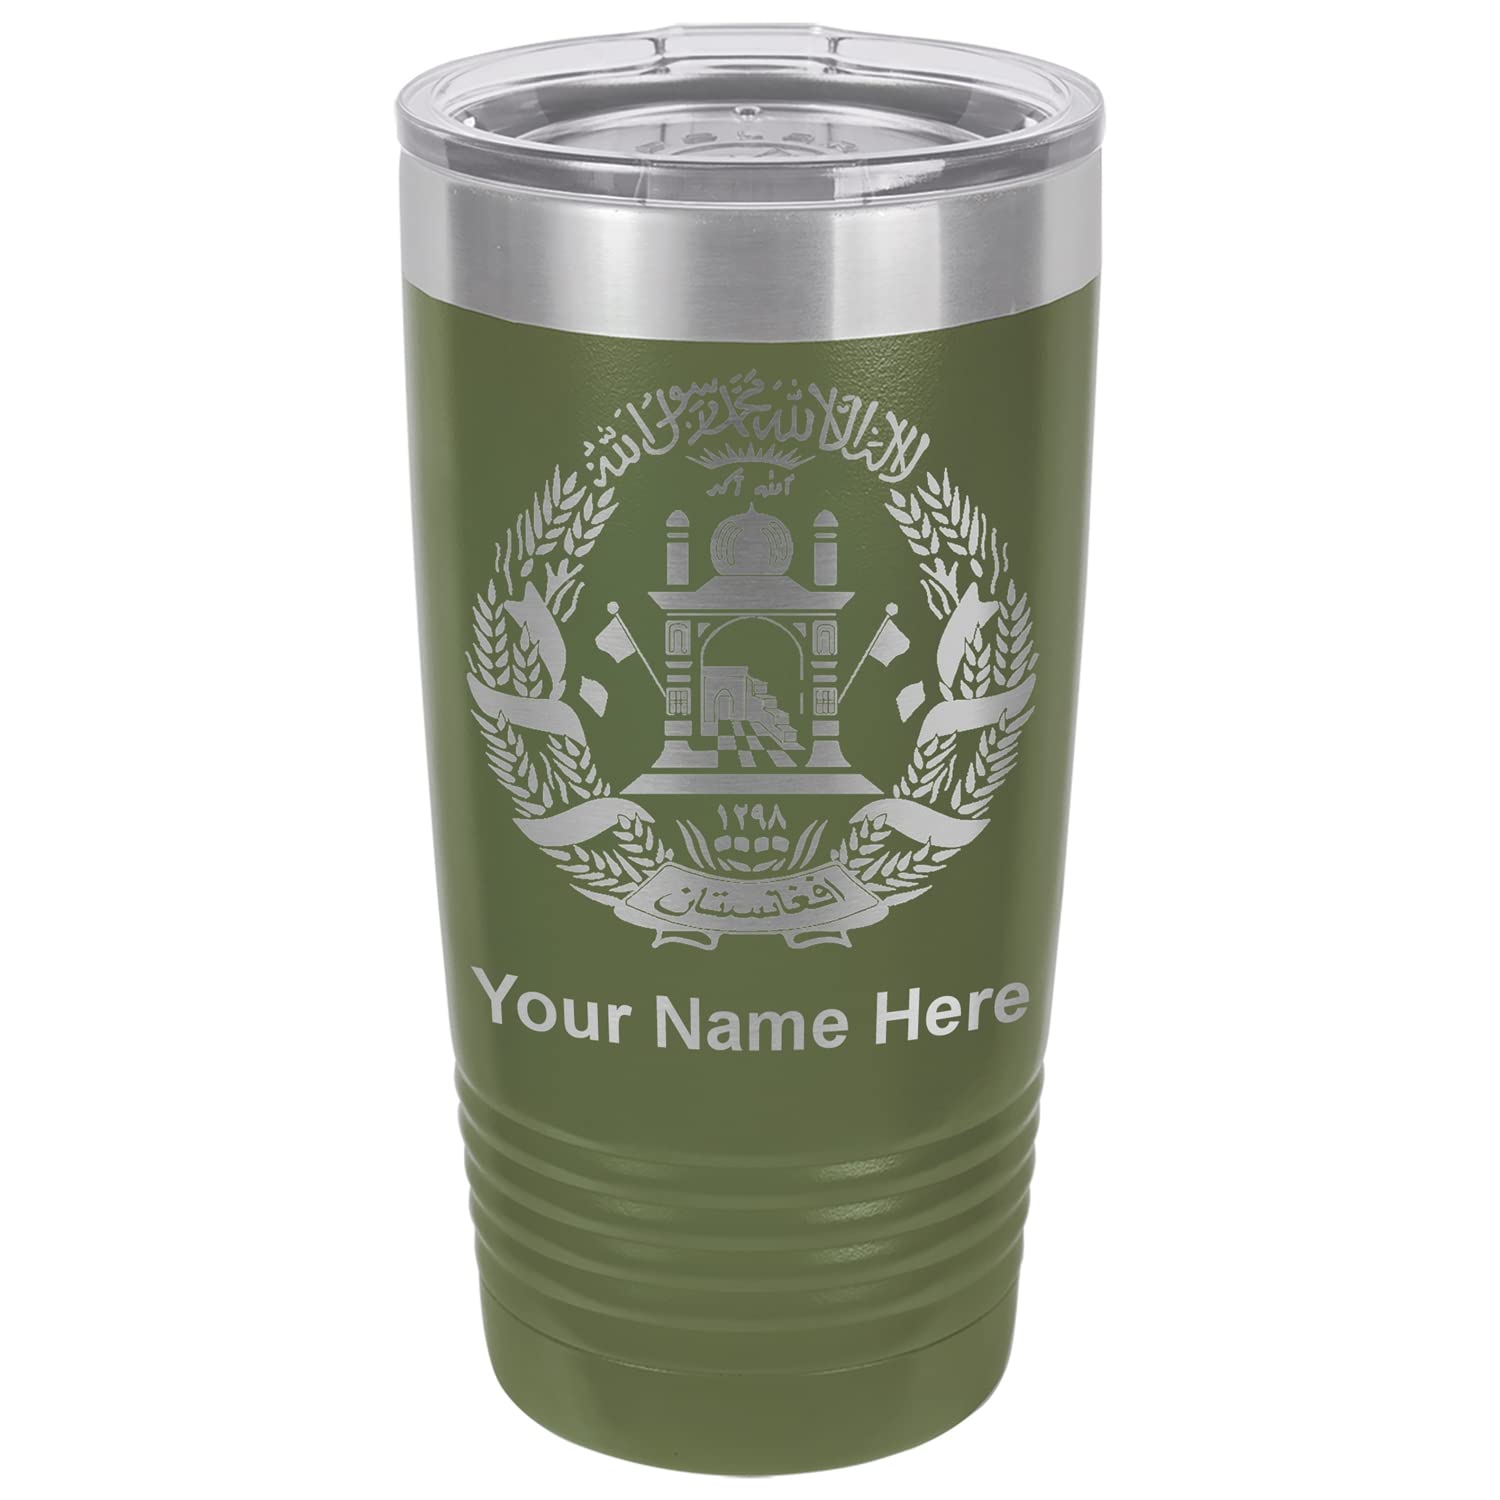 LaserGram 20oz Vacuum Insulated Tumbler Mug, Flag of Afghanistan, Personalized Engraving Included (Camo Green)